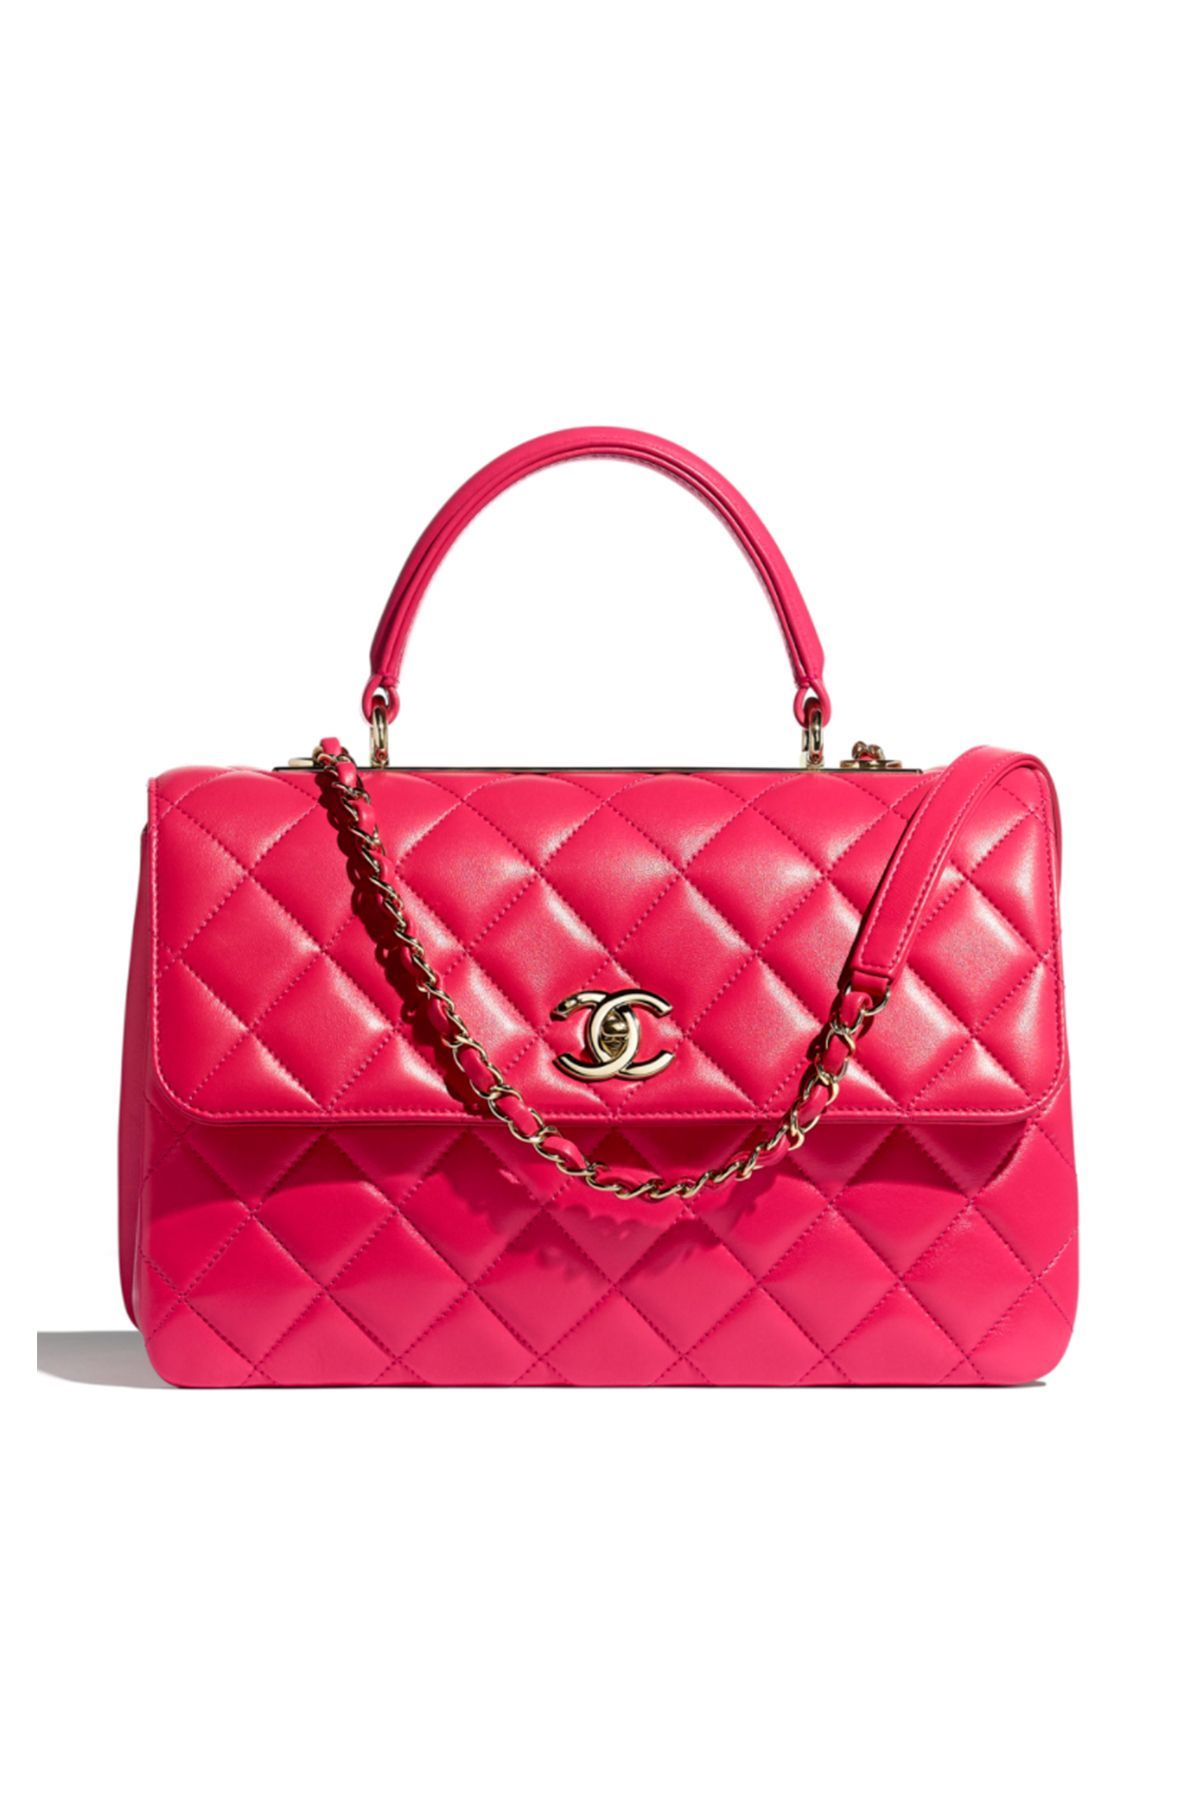 6 COLOURS OF CHANEL BAG THAT ARE AS EASY TO STYLE AS BLACK  YouTube